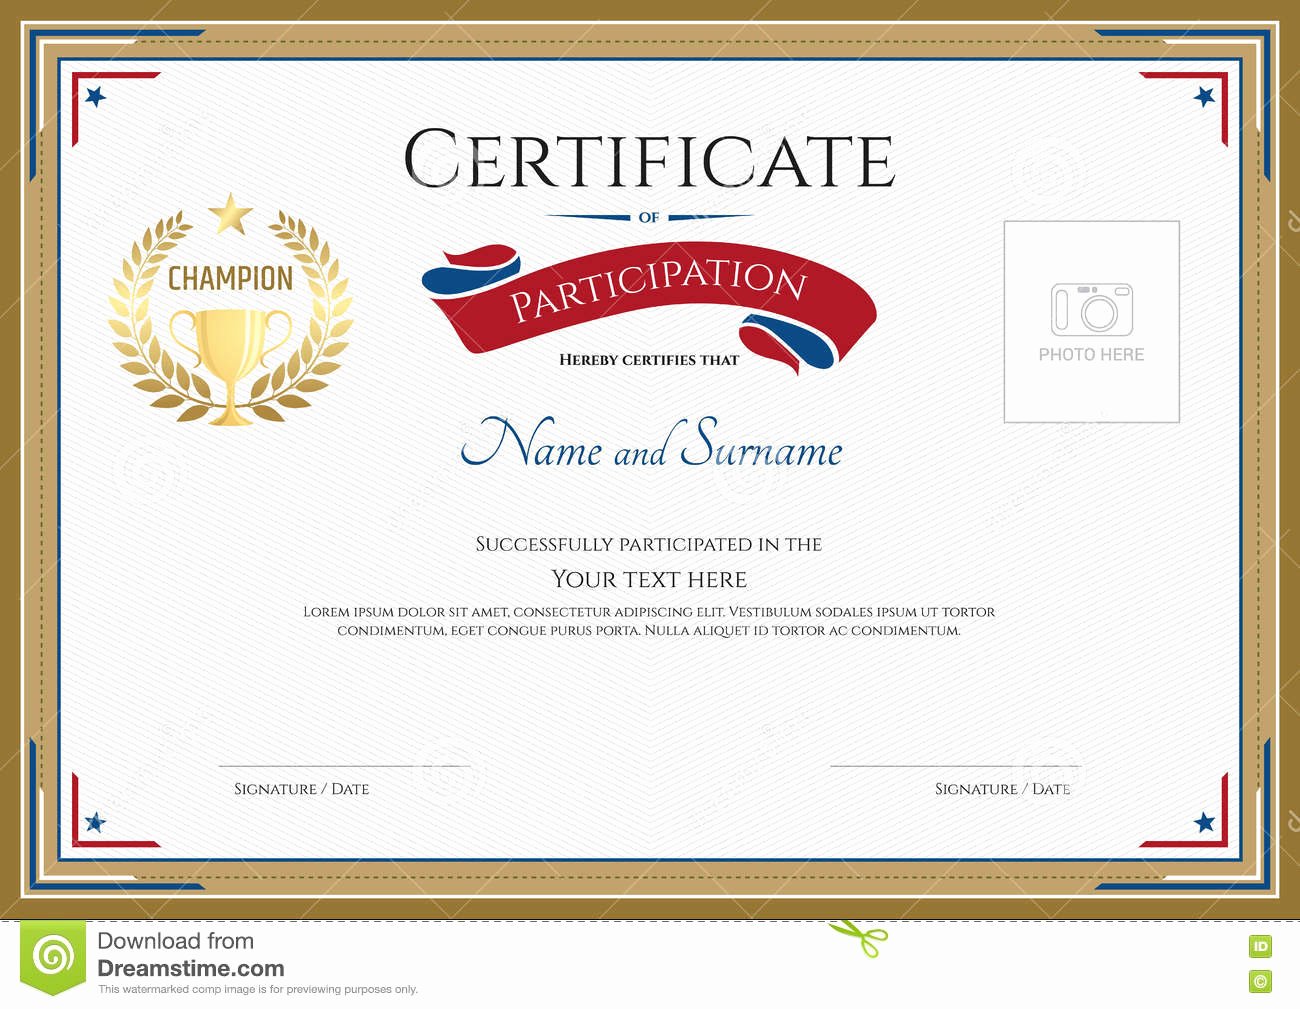 Sports Certificate Wording New Certificate Participation Template In Sport theme Stock